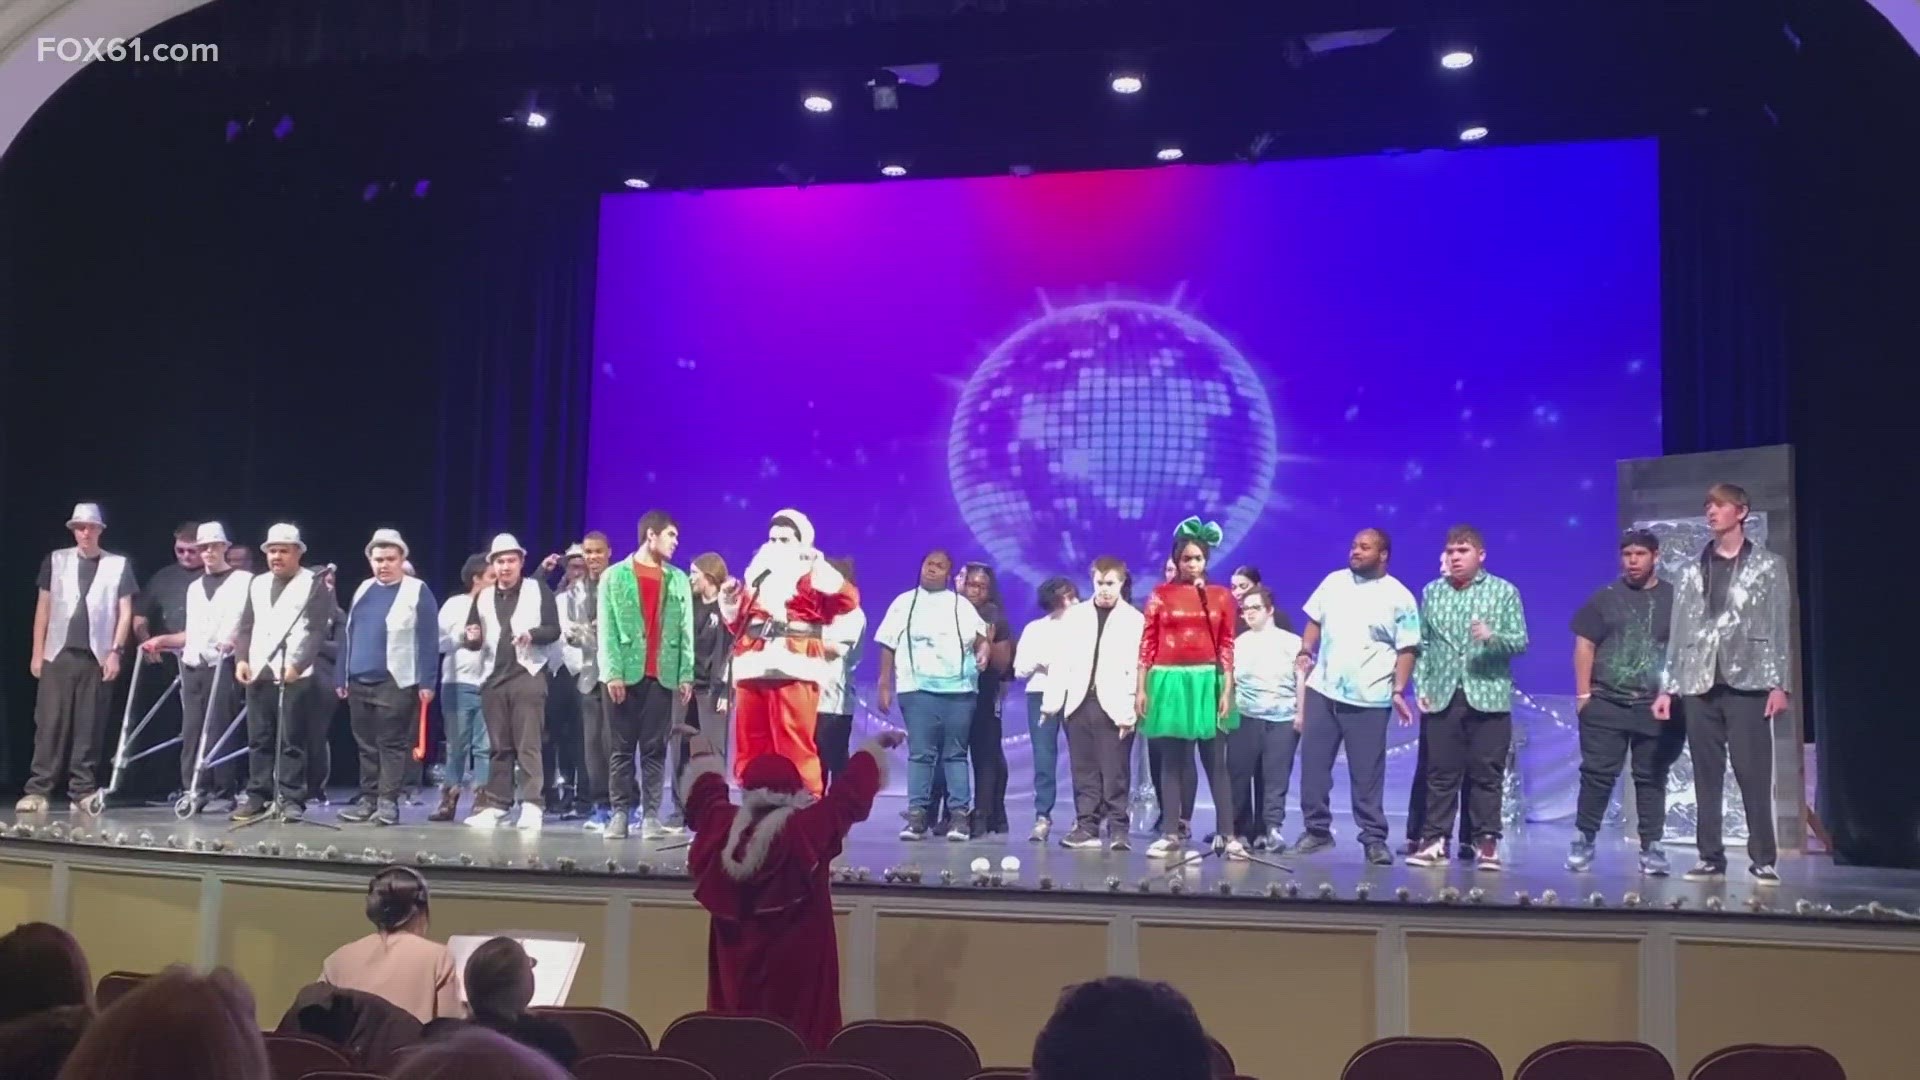 The Gengras Center at the University of Saint Joseph put together a magical holiday production. FOX61's Keith McGilvery shares highlights in the Morning Bright Spot.